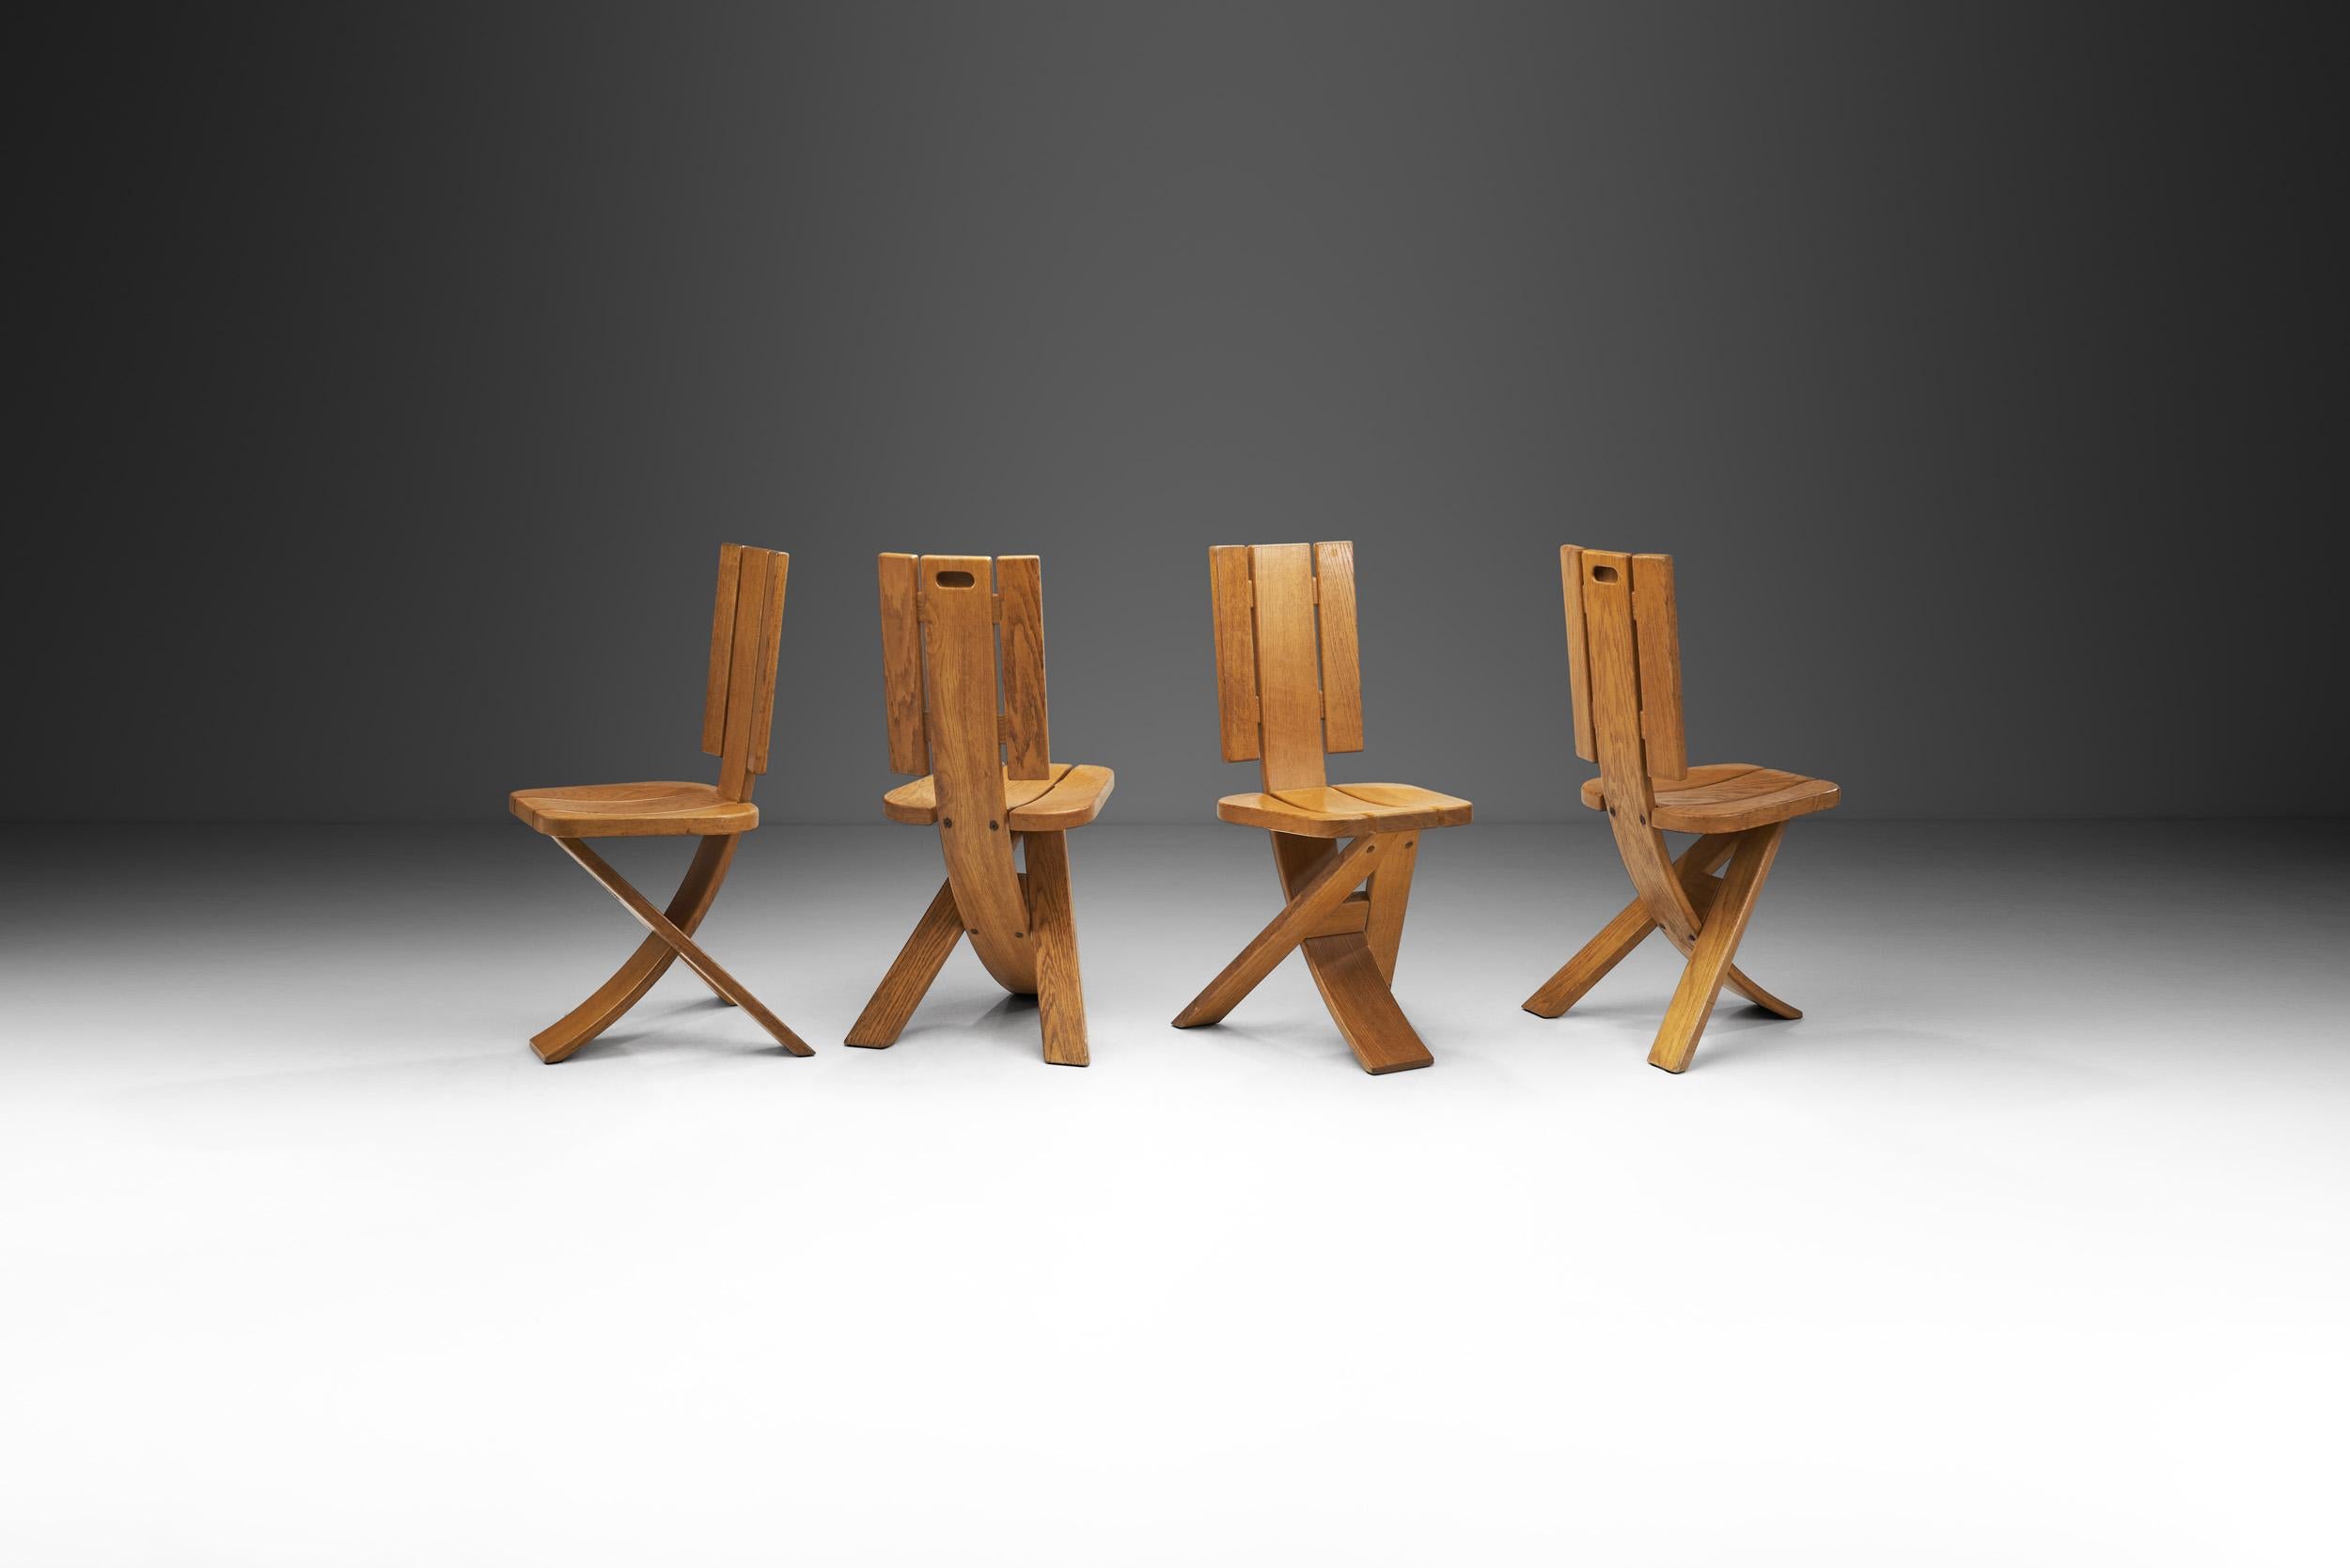 French Set of Four Sculptural Oak Tripod Chairs by Ebénisterie Seltz, France, 1970s